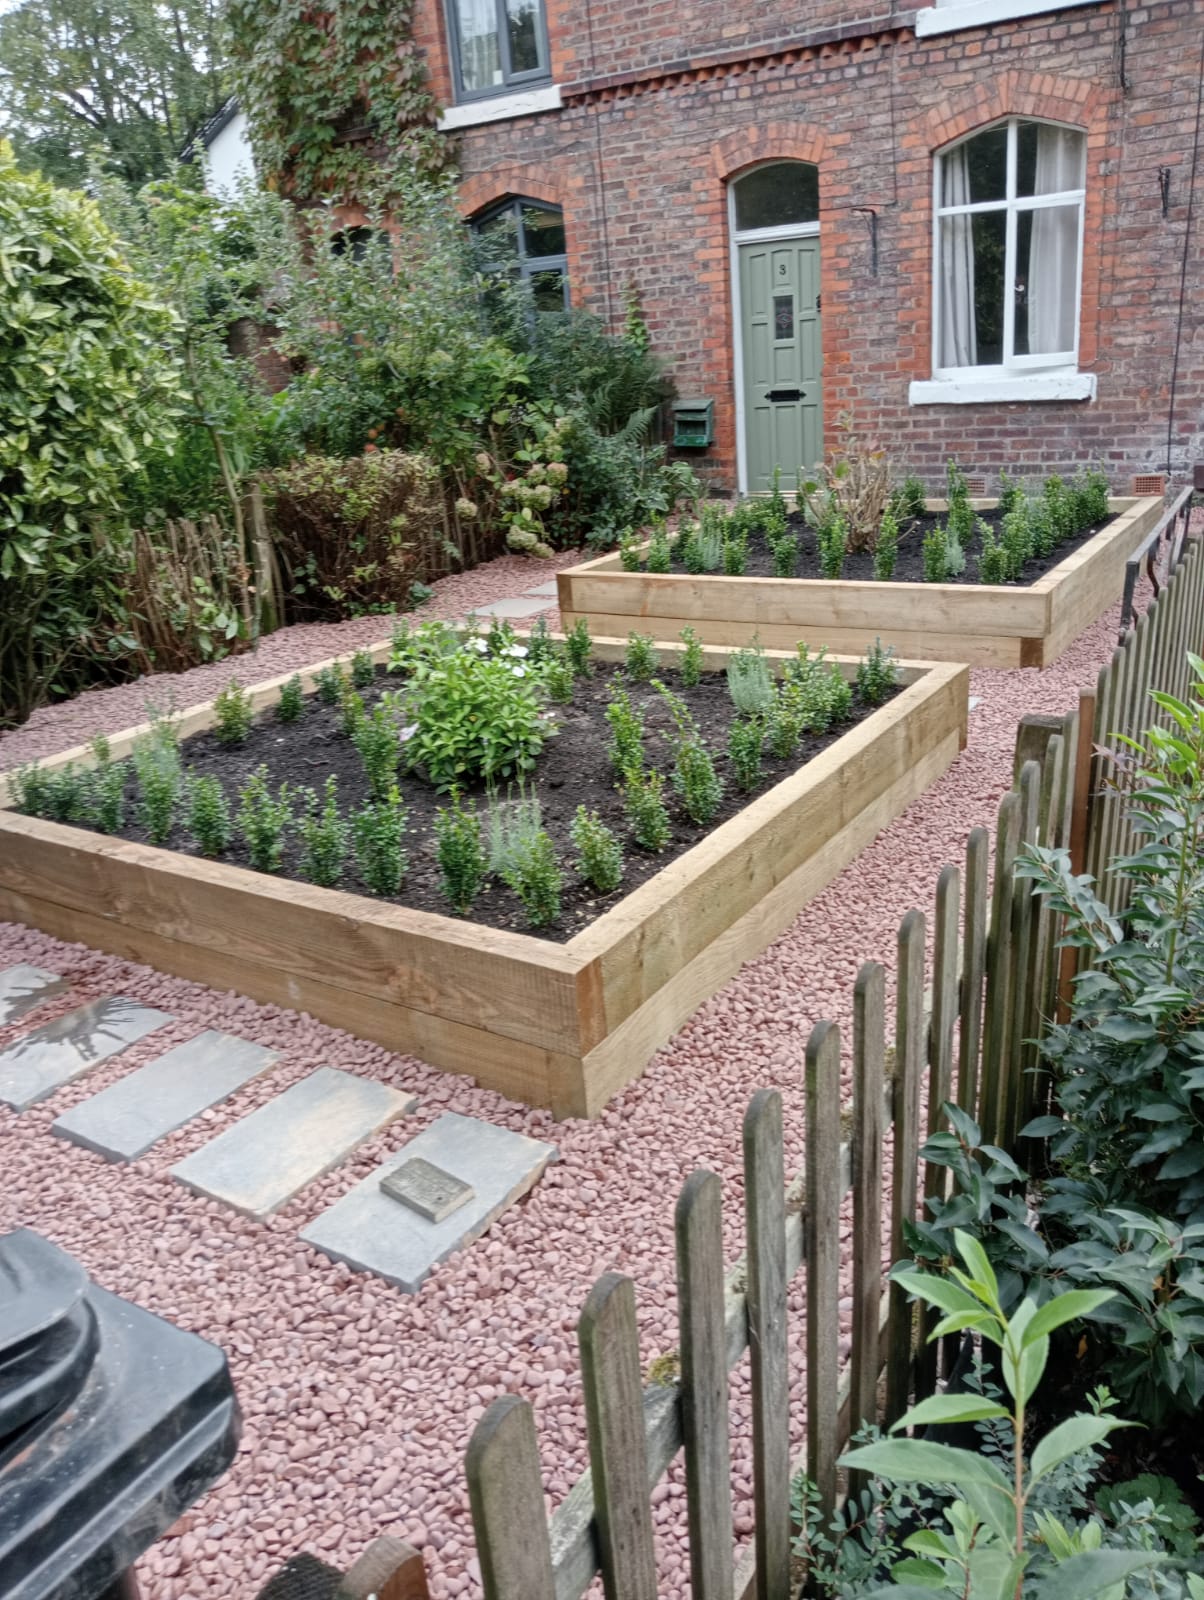 Raised beds installed in Stockport